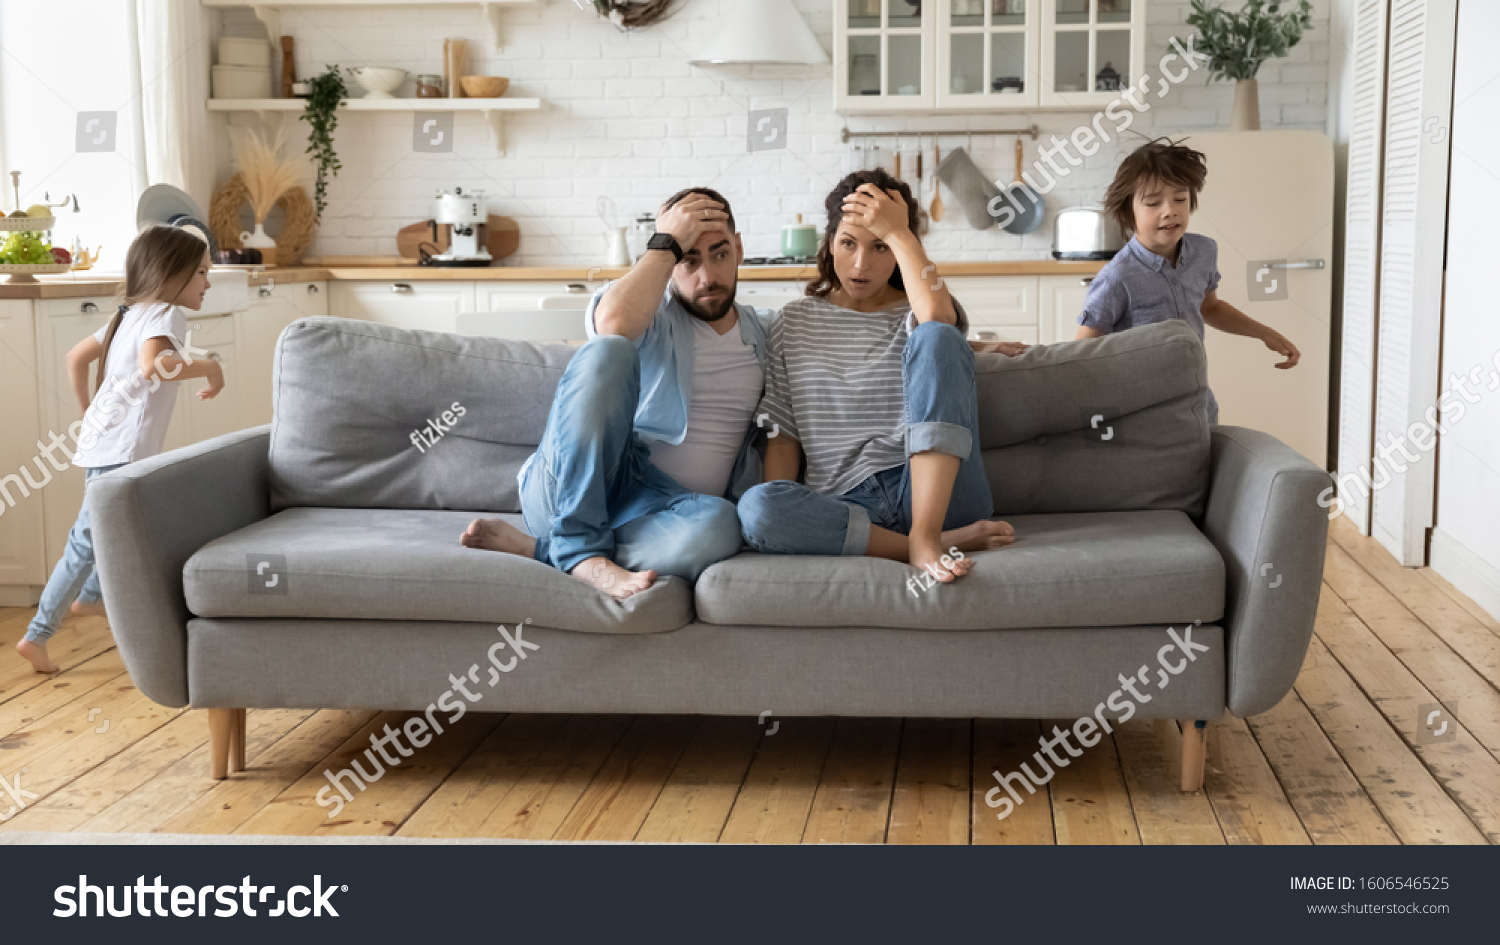 Tired mother and father sitting on couch feels annoyed exhausted while noisy little daughter and son shouting run around sofa where parents resting. Too active hyperactive kids, need repose concept #1606546525